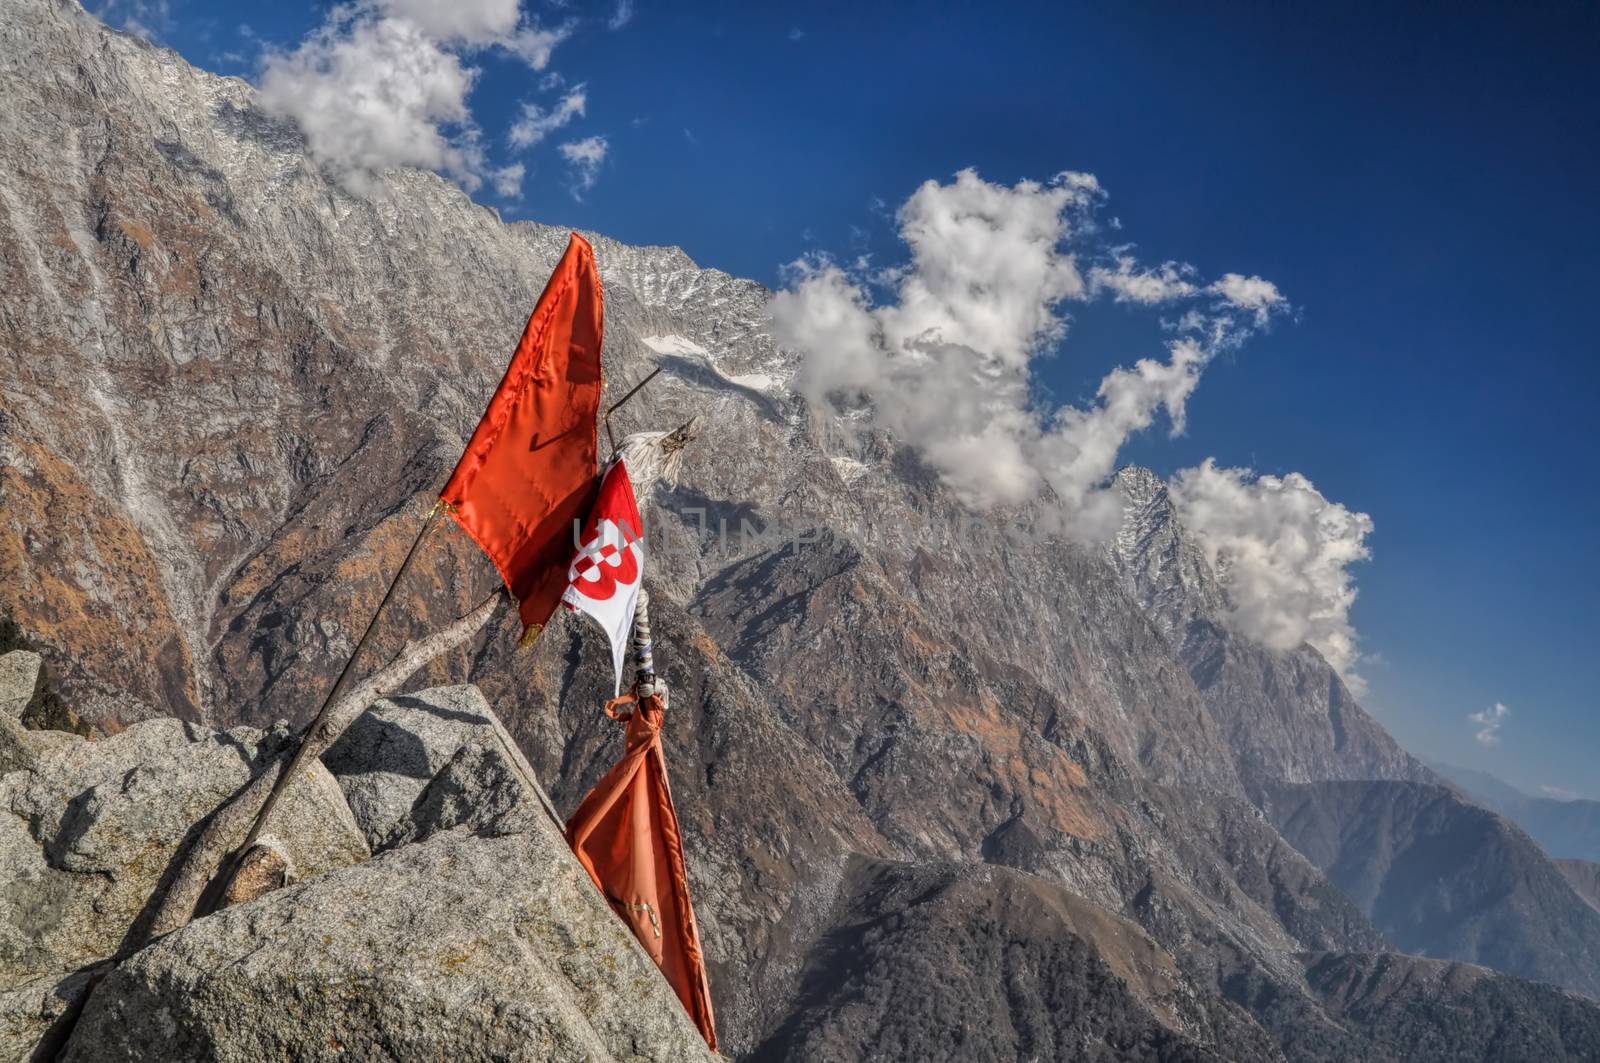 Picturesque view of a flag stuck high in the rocky slope